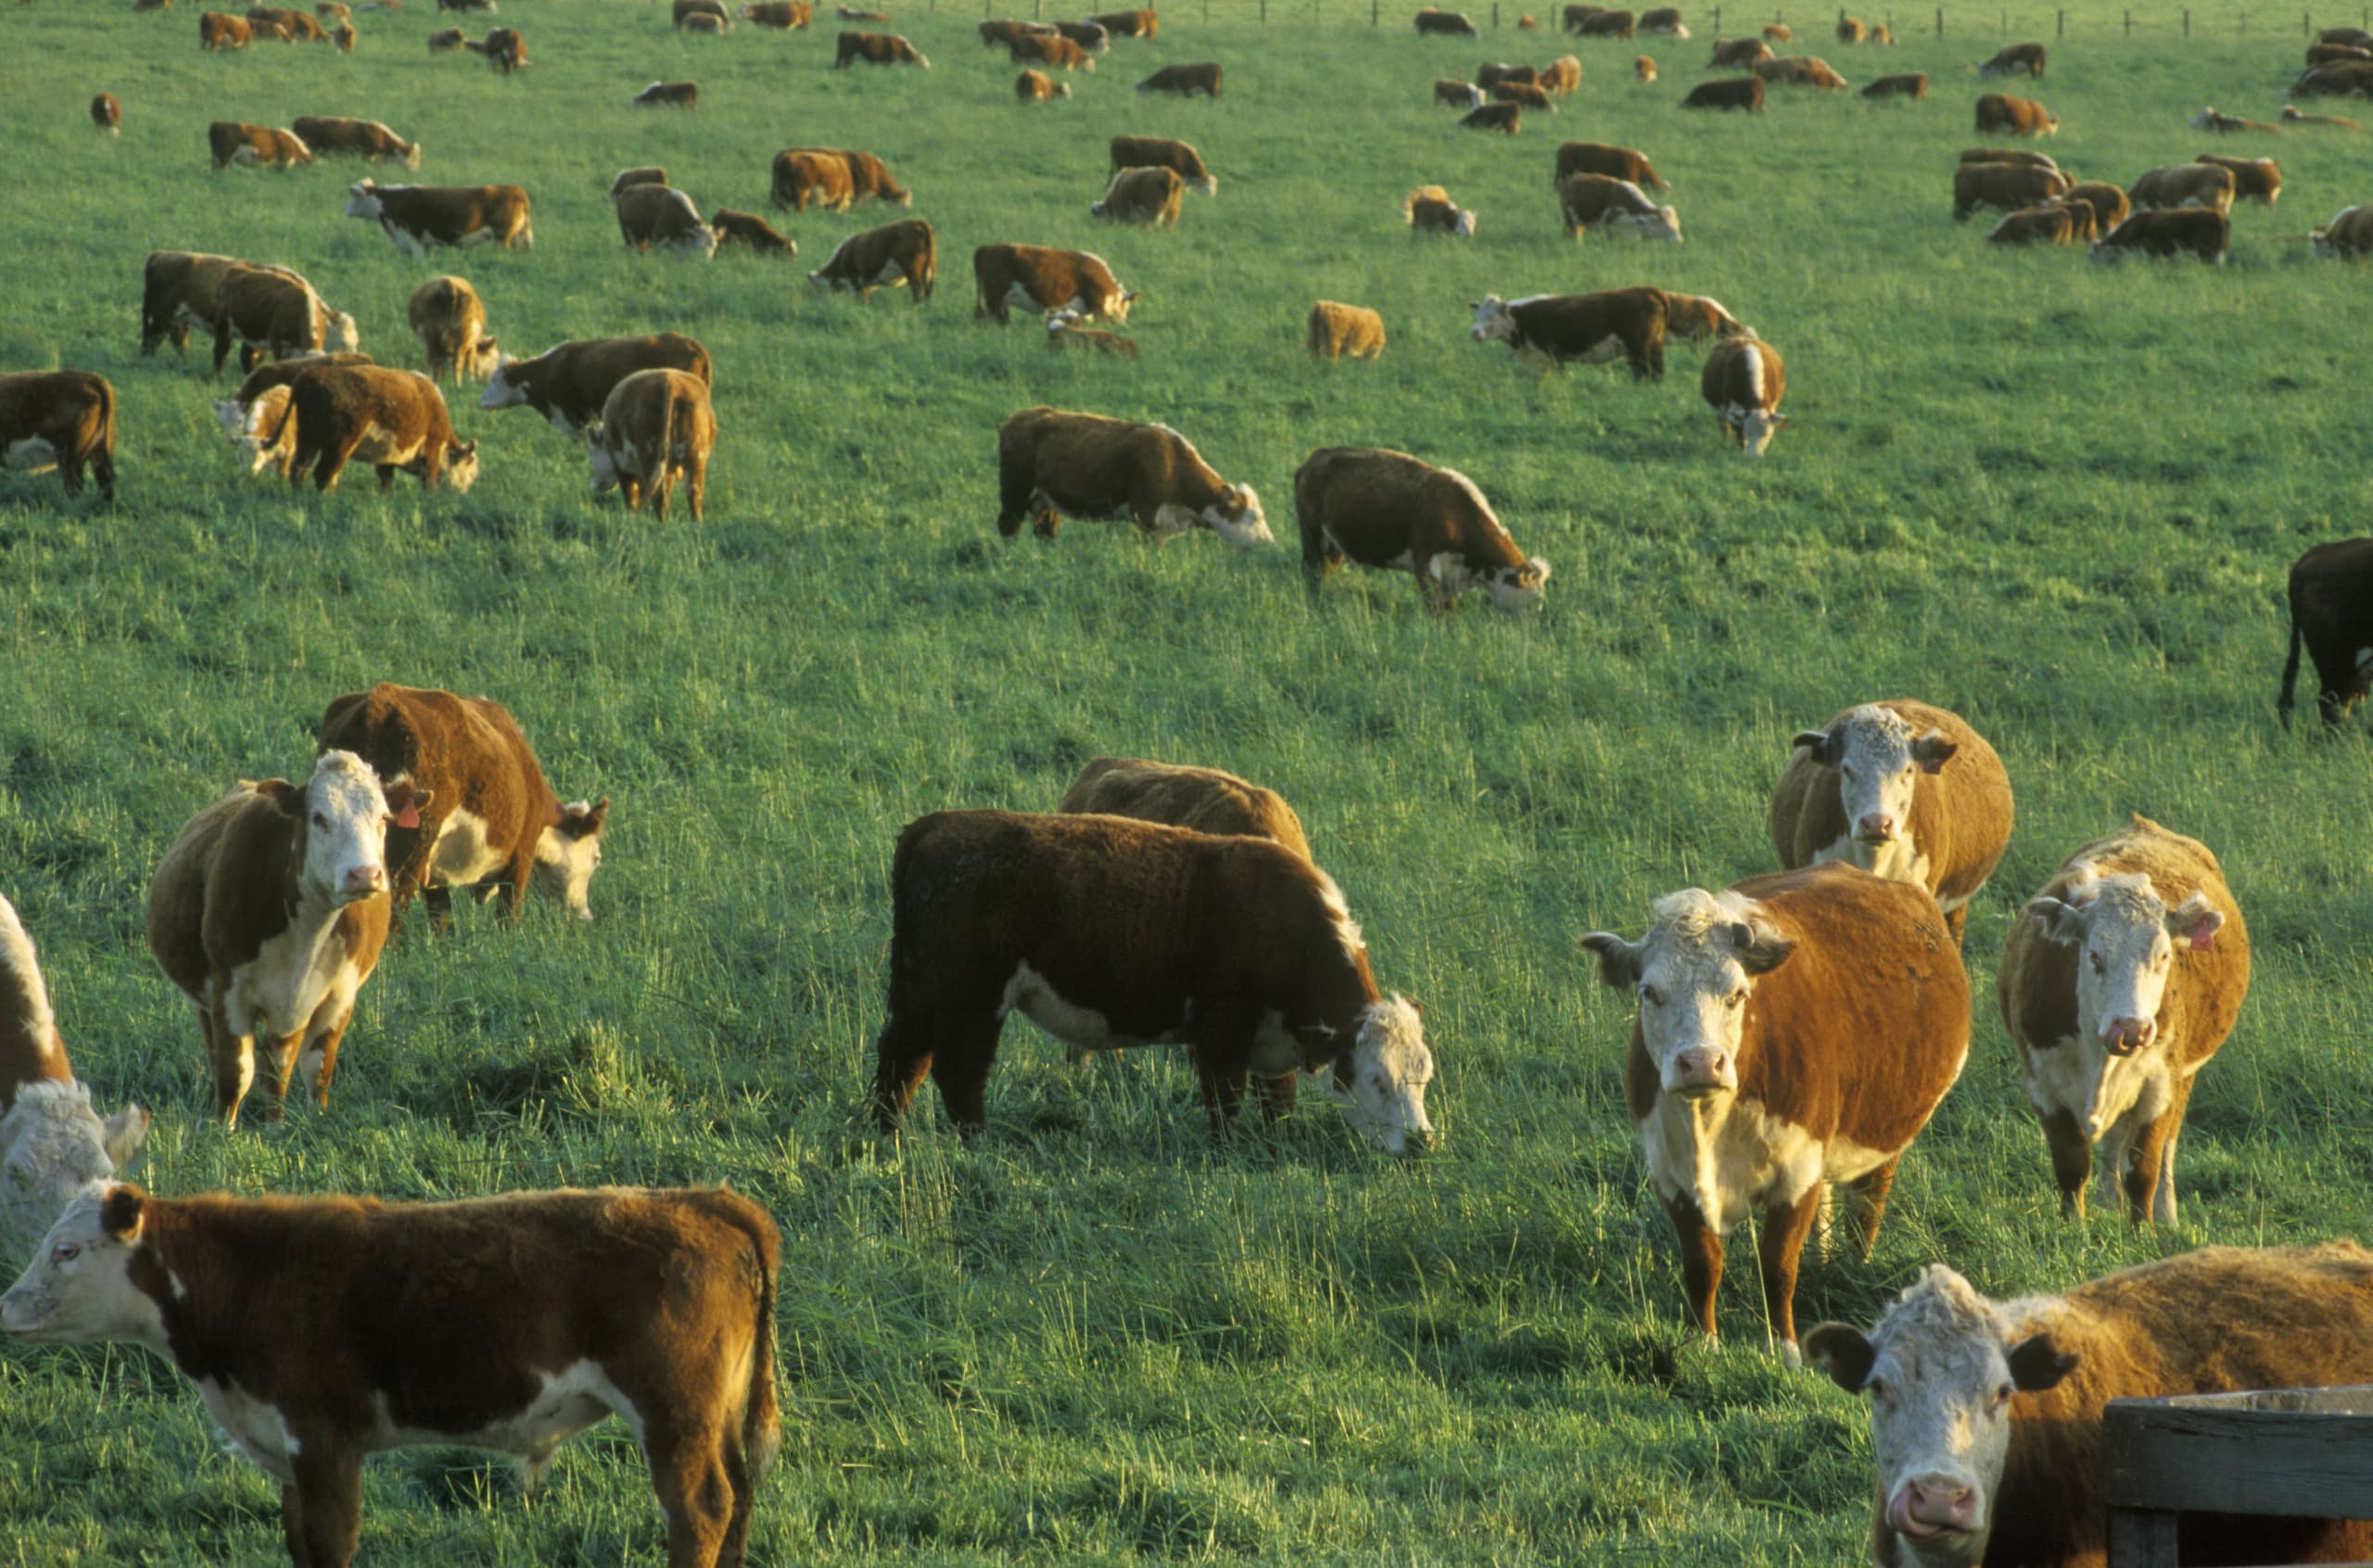 Brown and white Hereford cattle grazing in a green field